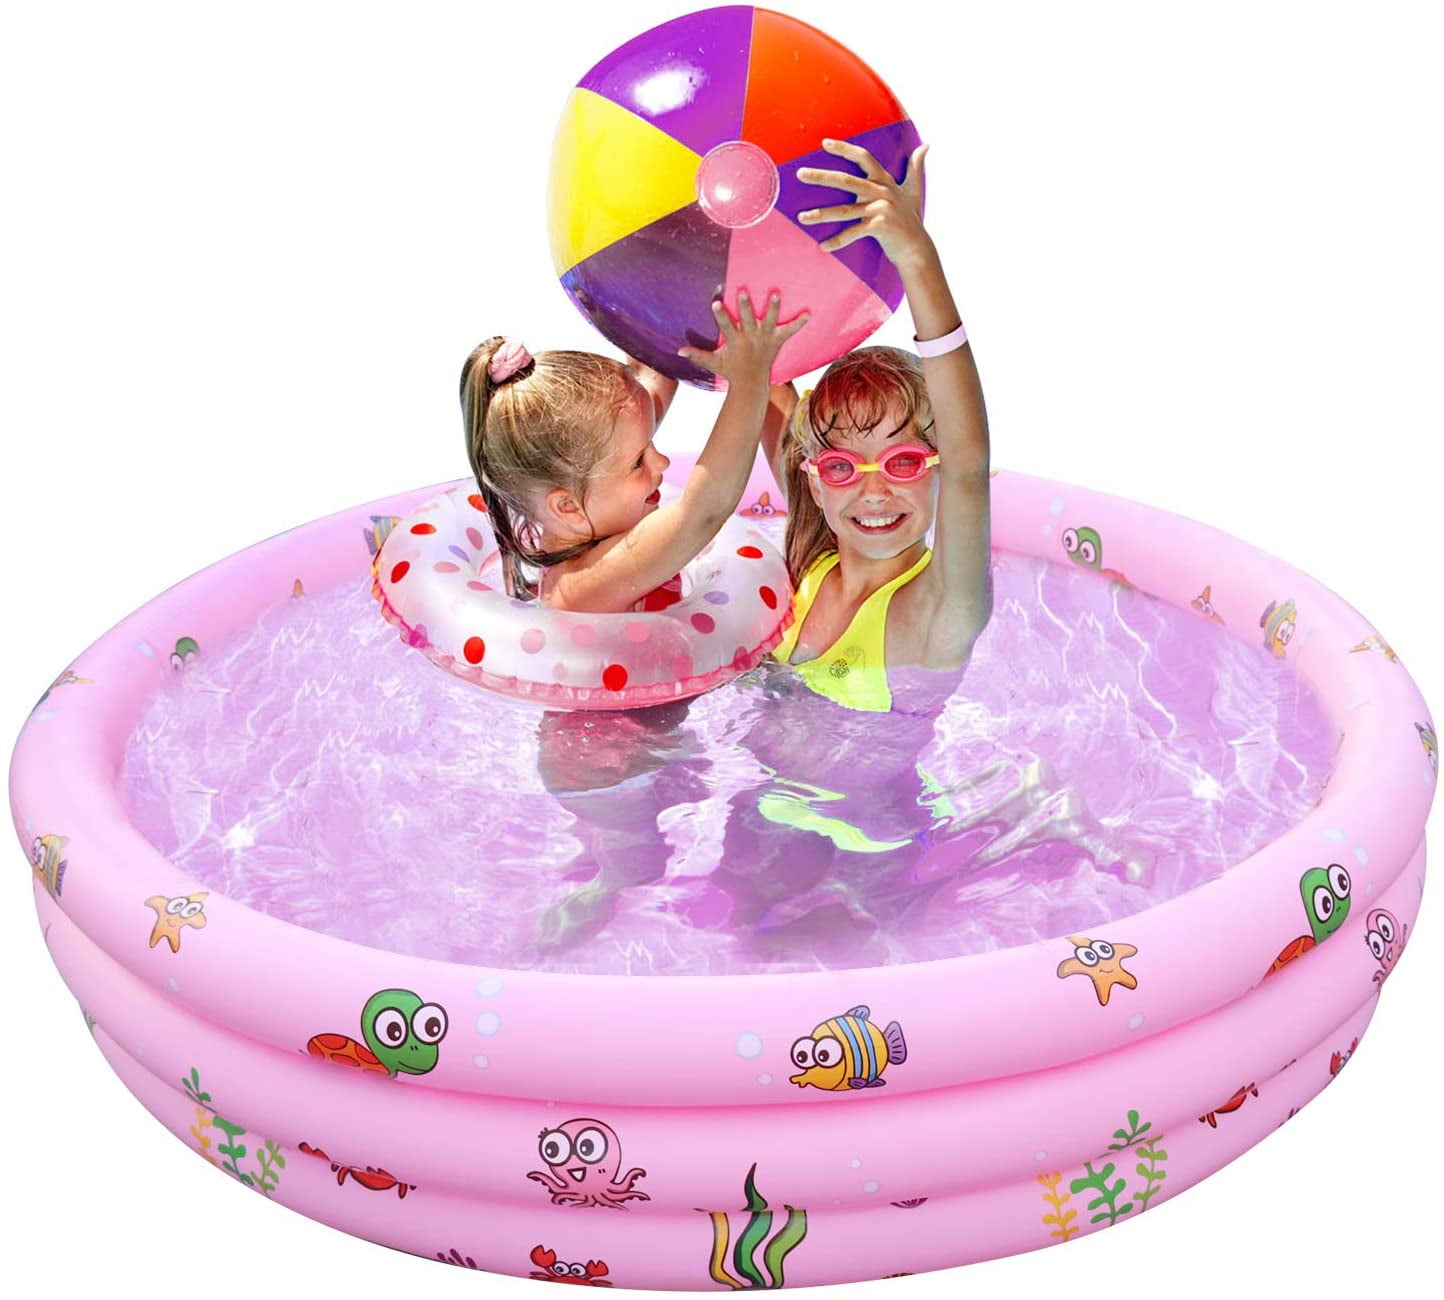 Blow Up pool This Above Ground Inflatable Swimming Pool Is Great For Family Kids & Adults To Have Outdoor Water Fun With Floats & Toys Big Pump Included. But Light & Portable Quick & Easy Set 